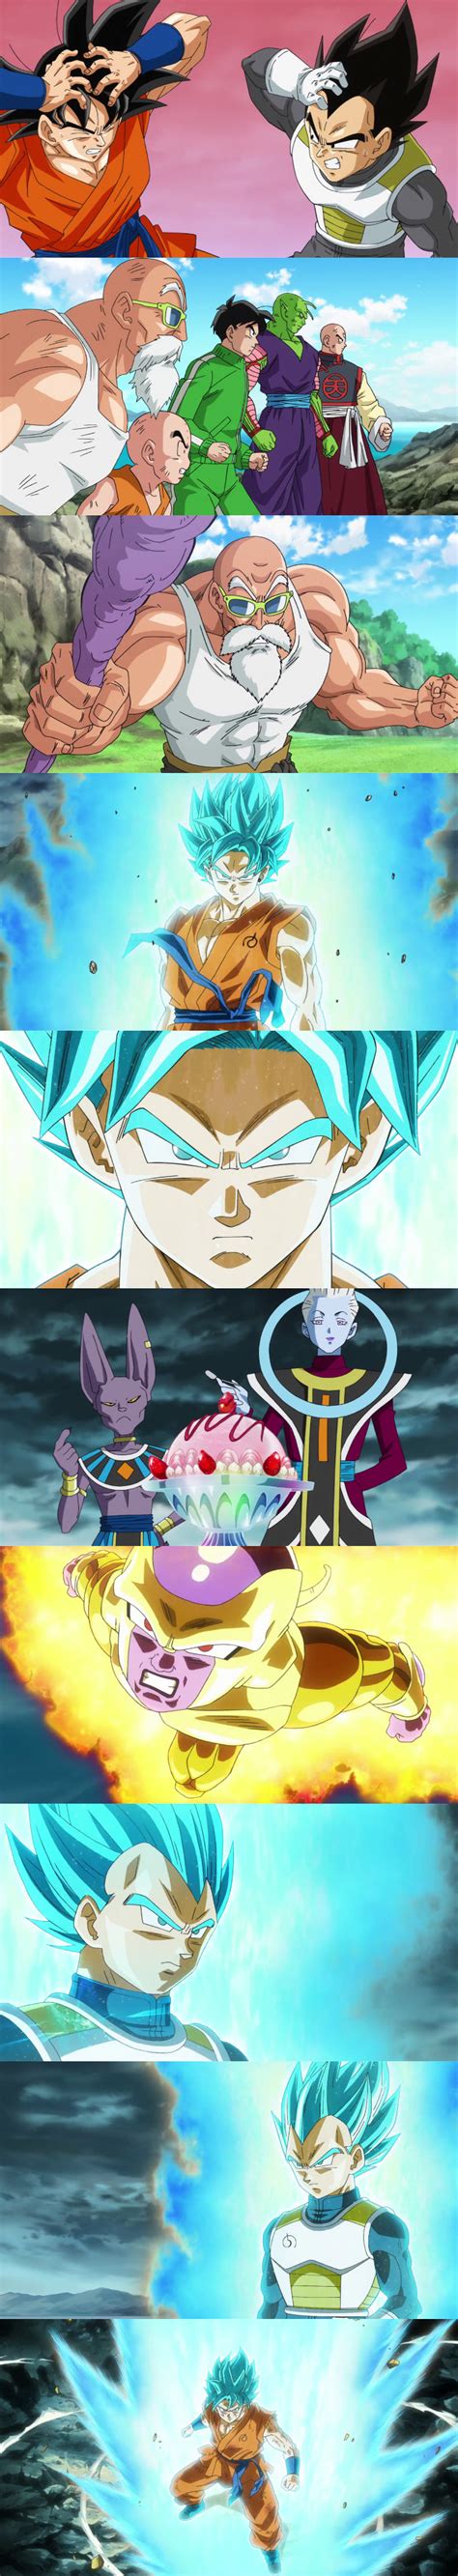 The burning battles,1 is the eleventh dragon ball film. Favorite scenes from DBZ - Resurrection of F | Dragon ball z, Anime, Dragon ball